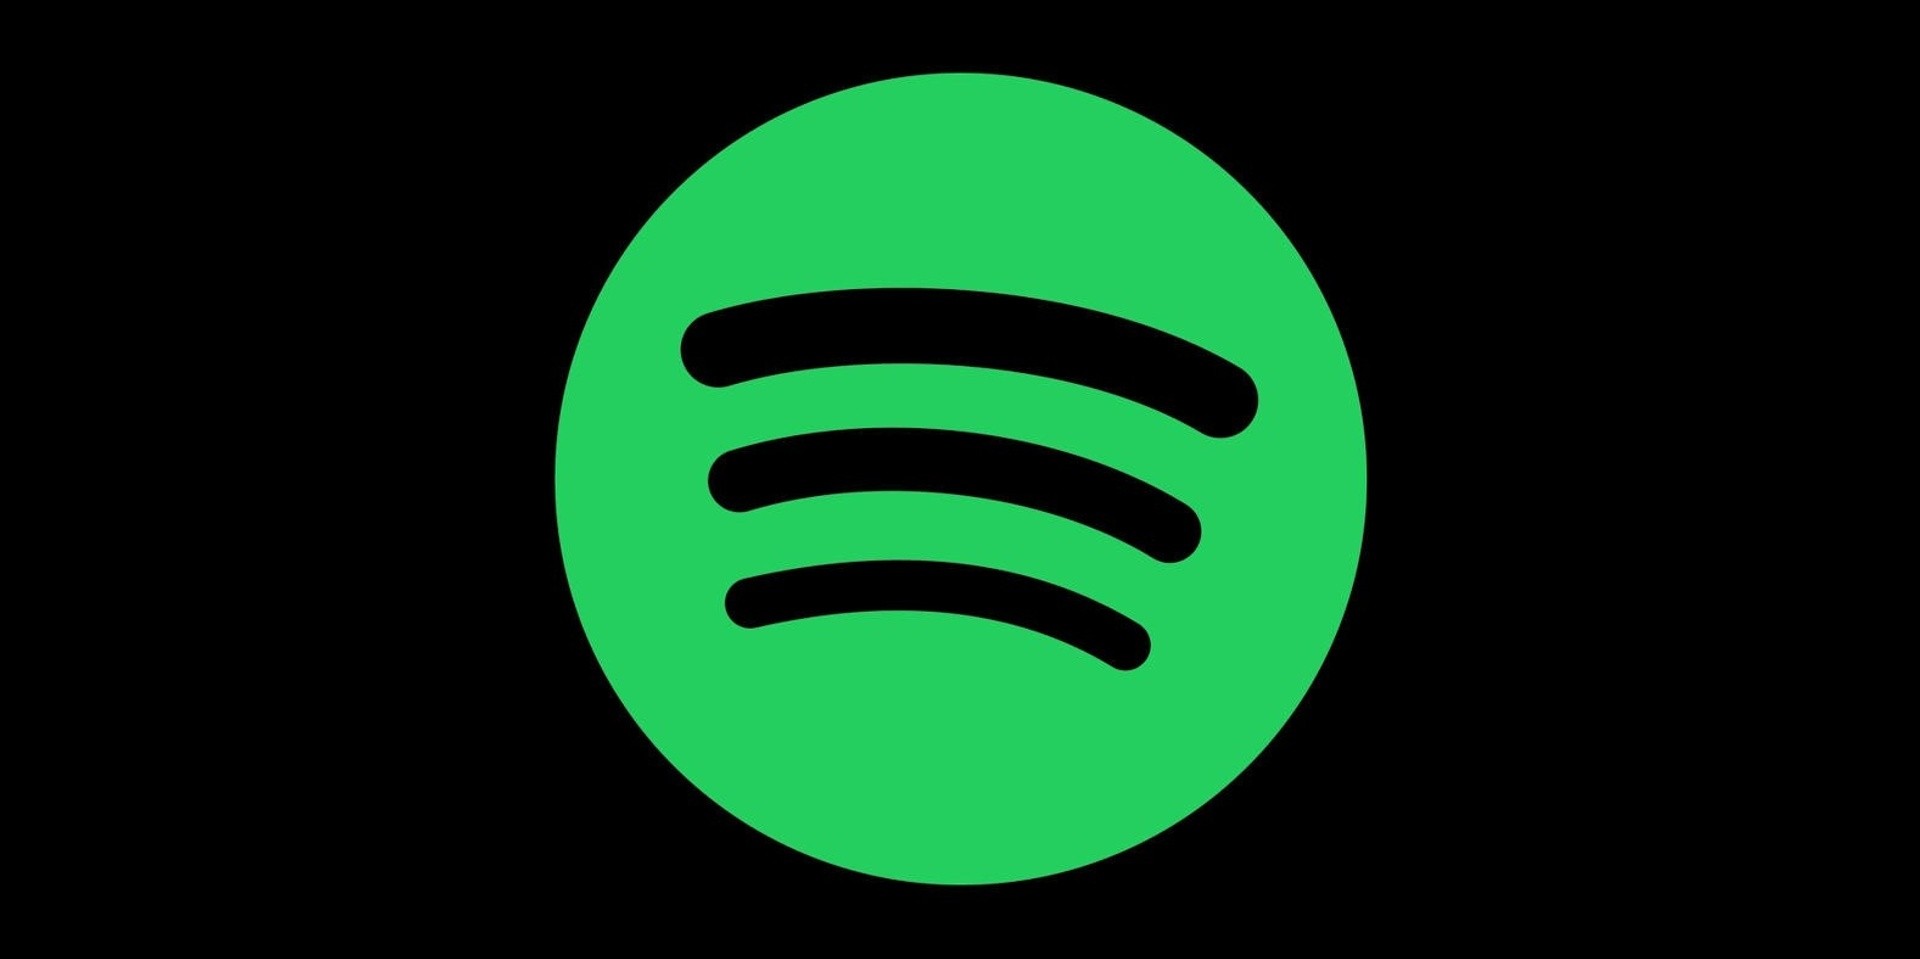 Spotify announces inclusion of podcasts into playlists